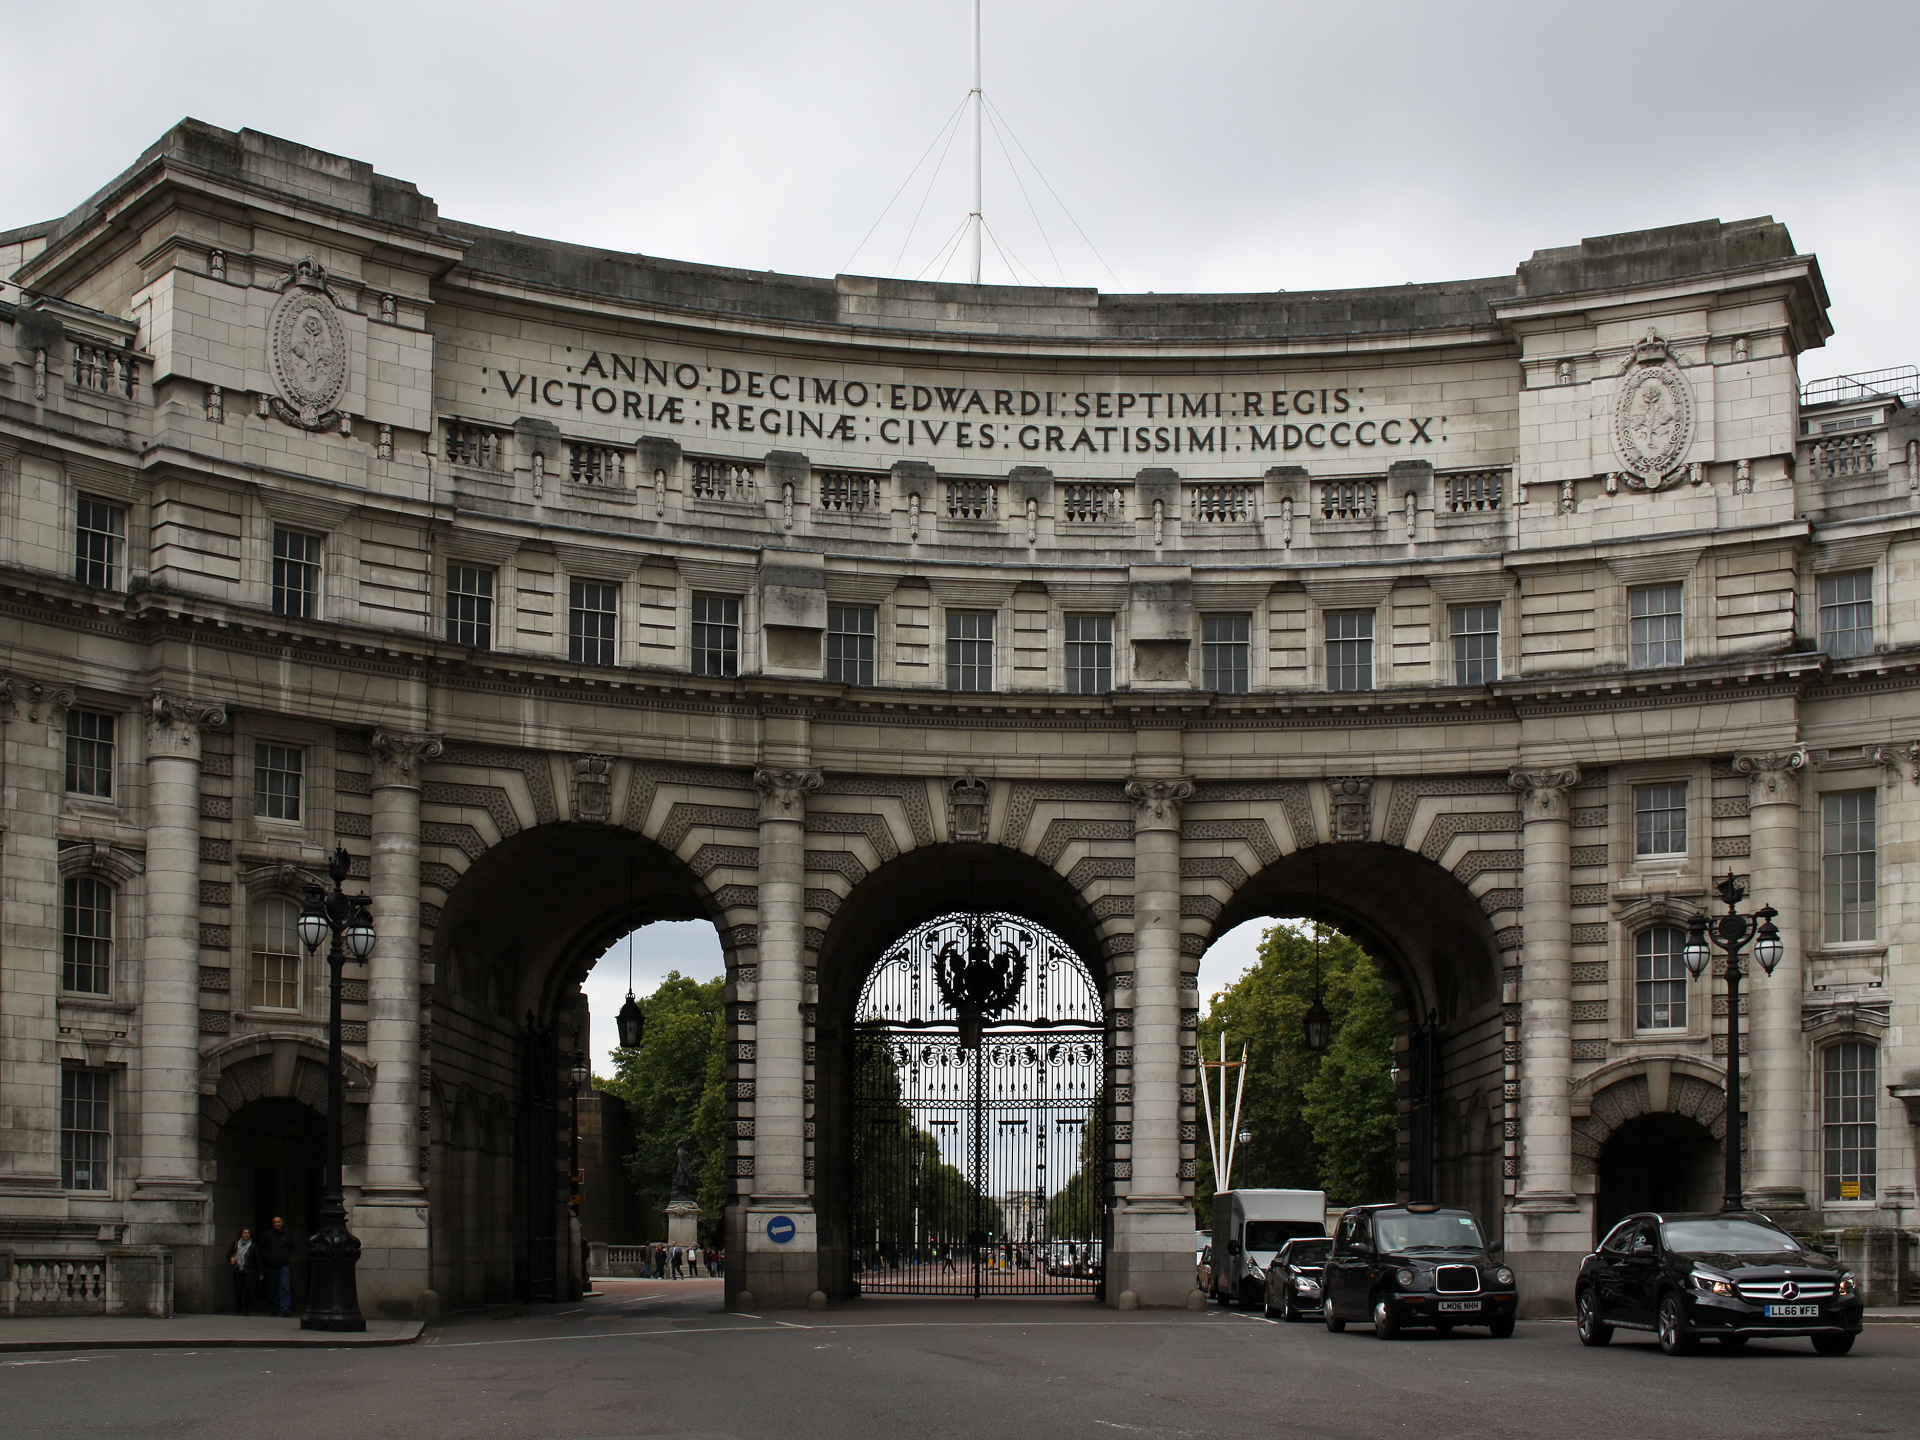 Admiralty Arch (Travels » London » London at Day)